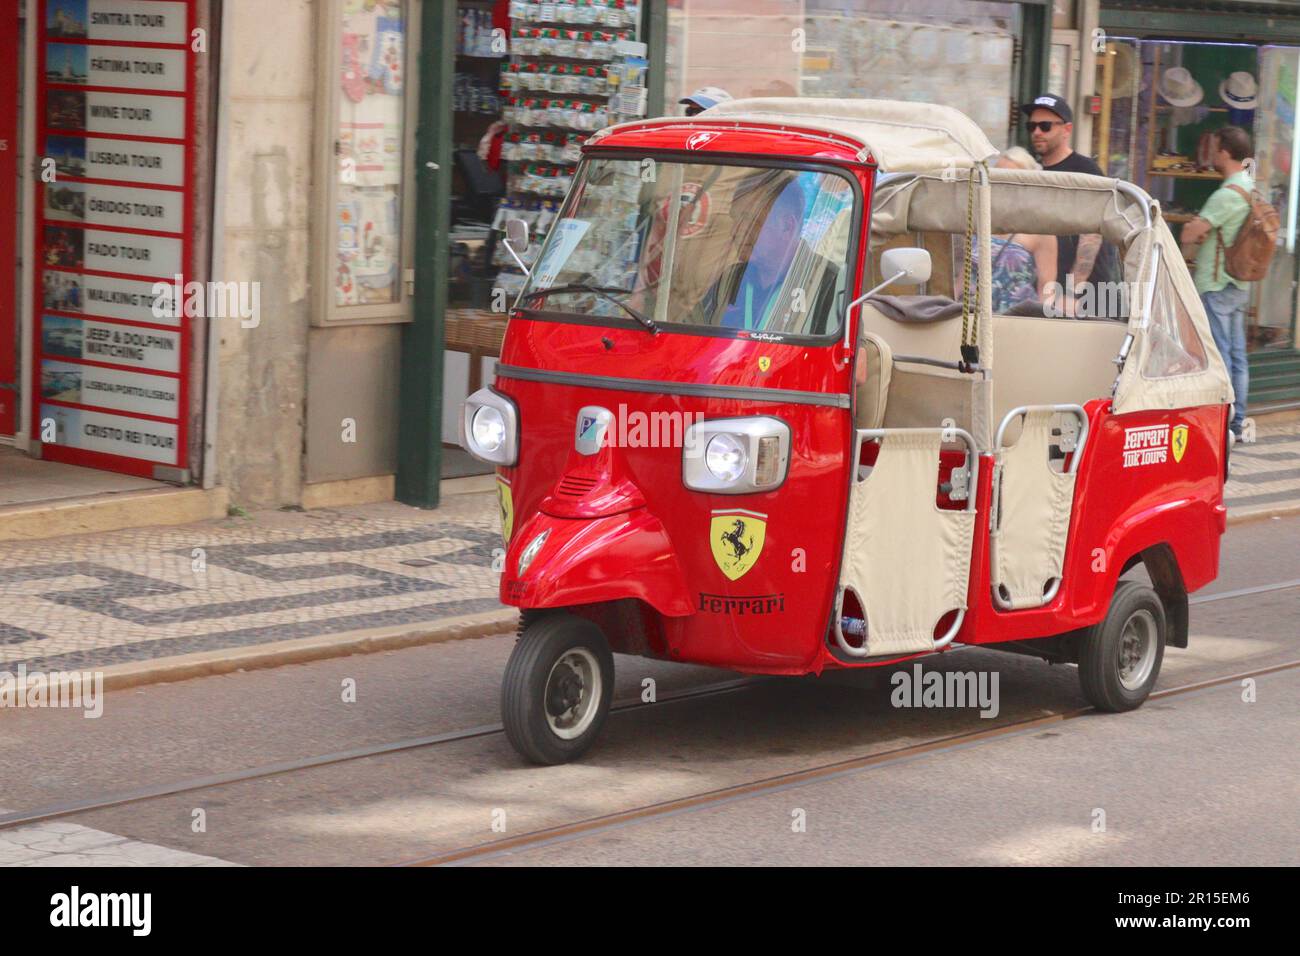 A Piaggio Ape Calessino autorickshaw, one of the last 999 limited edition petrol engined rickshaws before converting production to electric power. Stock Photo